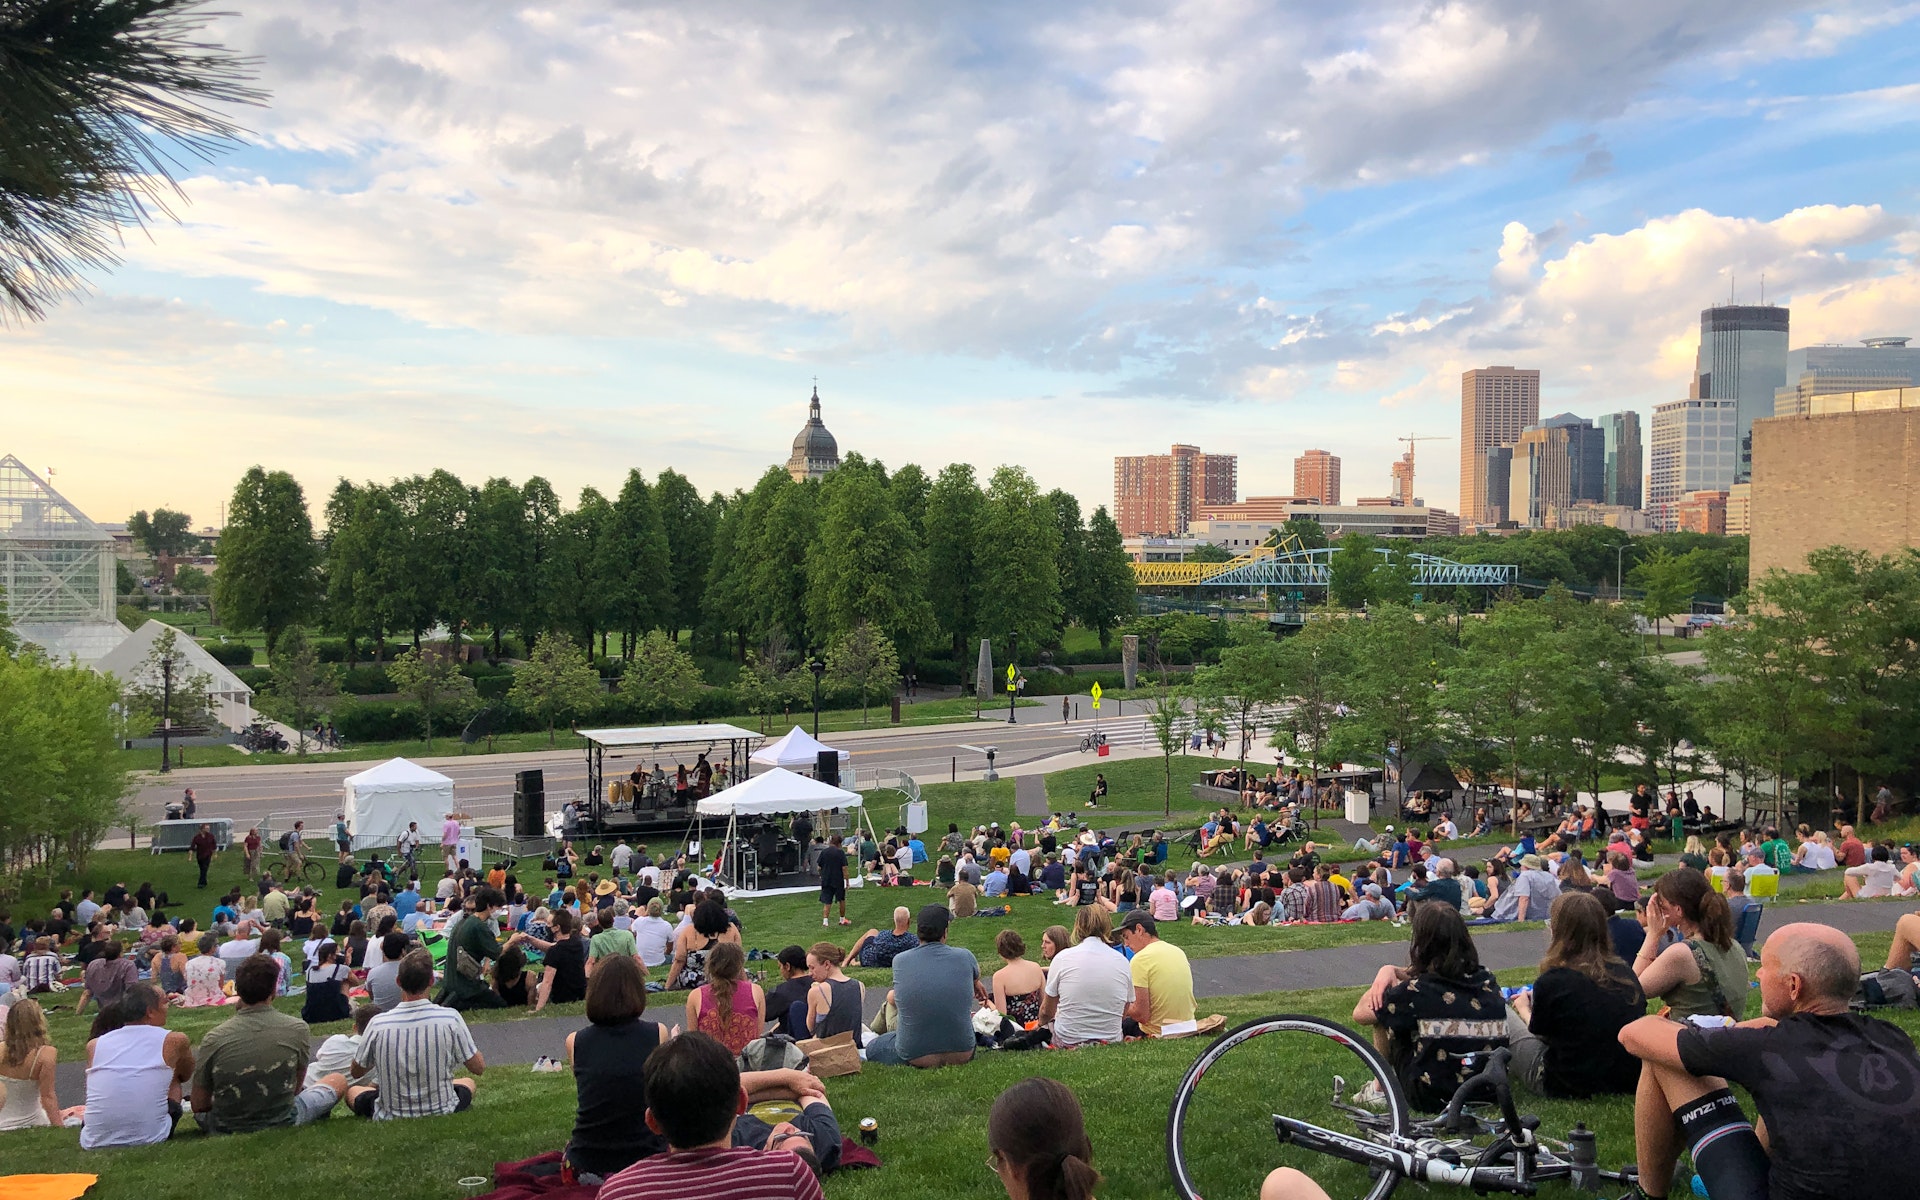 Groups of people sit on an outdoor hillside watching a band perform on a stage with a view of the MInneapolis skyline in the background.